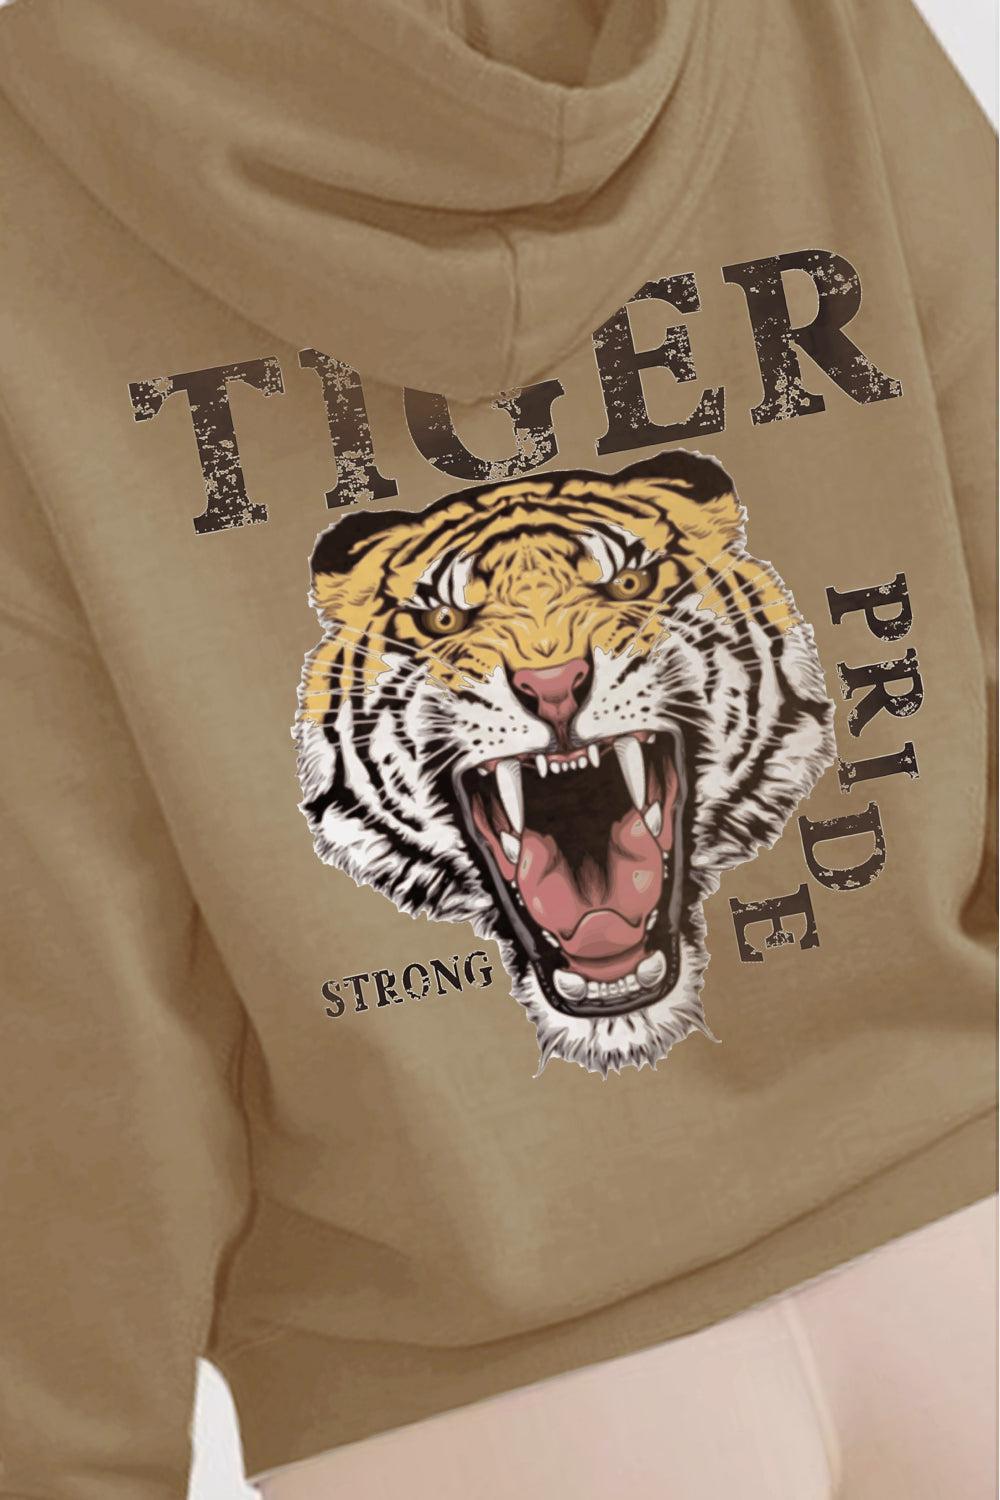 Simply Love Full Size TIGER STRONG PRIDE Graphic Hoodie BLUE ZONE PLANET